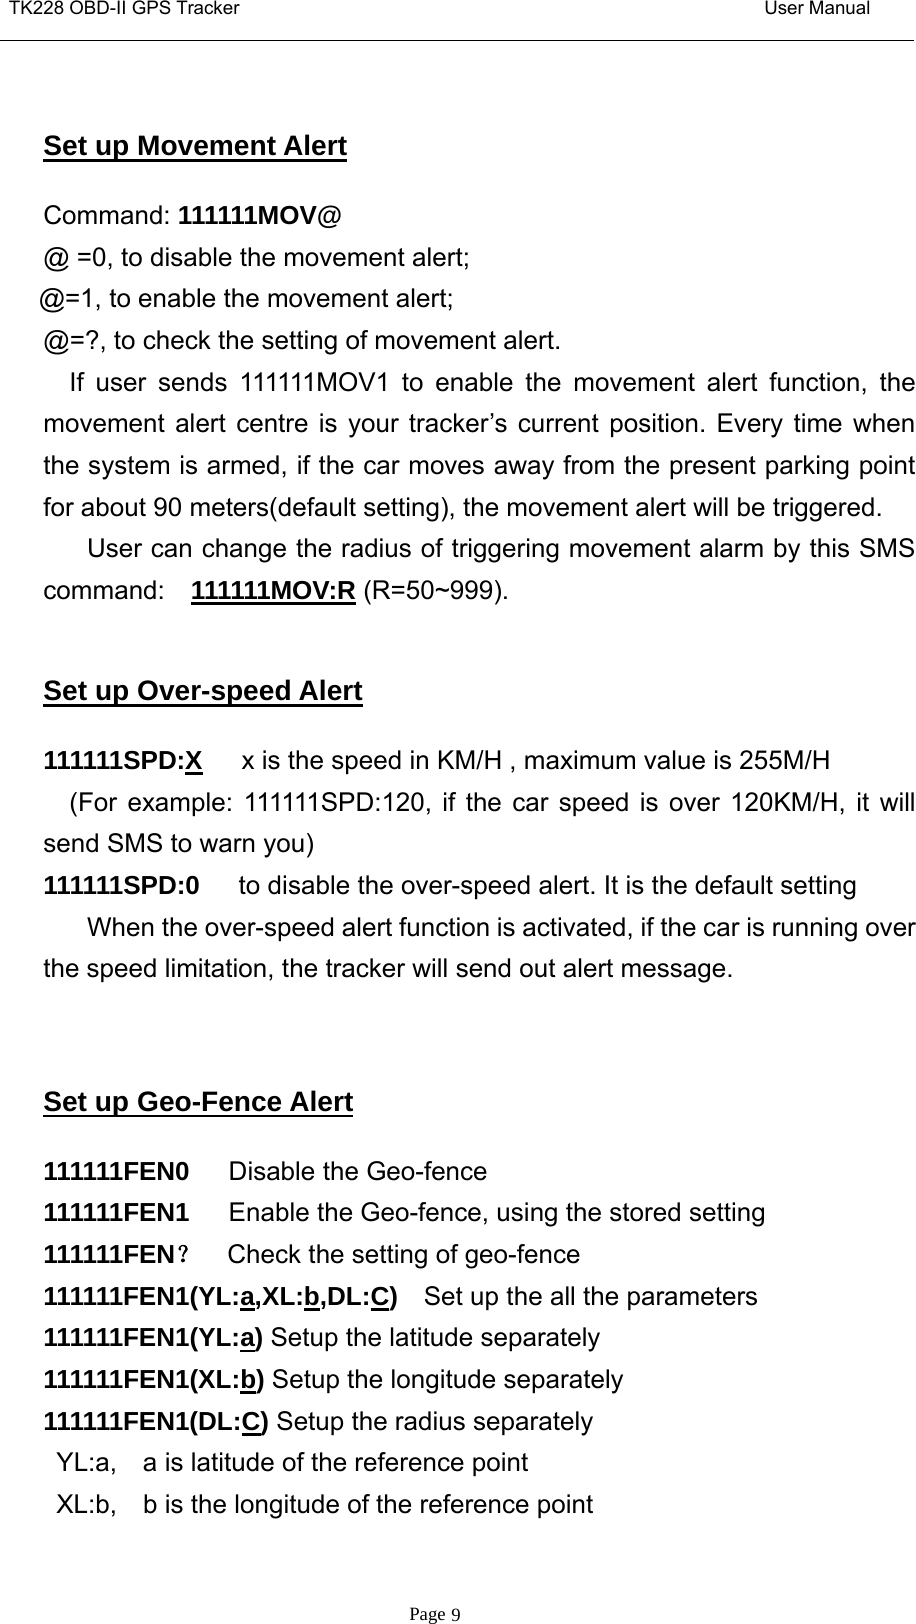 TK228 OBD-II GPS Tracker User ManualPage 9Set up Movement AlertCommand: 111111MOV@@ =0, to disable the movement alert;@=1, to enable the movement alert;@=?, to check the setting of movement alert.If user sends 111111MOV1 to enable the movement alert function, themovement alert centre is your tracker’s current position. Every time whenthe system is armed, if the car moves away from the present parking pointfor about 90 meters(default setting), the movement alert will be triggered.User can change the radius of triggering movement alarm by this SMScommand: 111111MOV:R (R=50~999).Set up Over-speed Alert111111SPD:X x is the speed in KM/H , maximum value is 255M/H(For example: 111111SPD:120, if the car speed is over 120KM/H, it willsend SMS to warn you)111111SPD:0 to disable the over-speed alert. It is the default settingWhen the over-speed alert function is activated, if the car is running overthe speed limitation, the tracker will send out alert message.Set up Geo-Fence Alert111111FEN0 Disable the Geo-fence111111FEN1 Enable the Geo-fence, using the stored setting111111FEN？Check the setting of geo-fence111111FEN1(YL:a,XL:b,DL:C)Set up the all the parameters111111FEN1(YL:a)Setup the latitude separately111111FEN1(XL:b)Setup the longitude separately111111FEN1(DL:C)Setup the radius separatelyYL:a, a is latitude of the reference pointXL:b, b is the longitude of the reference point